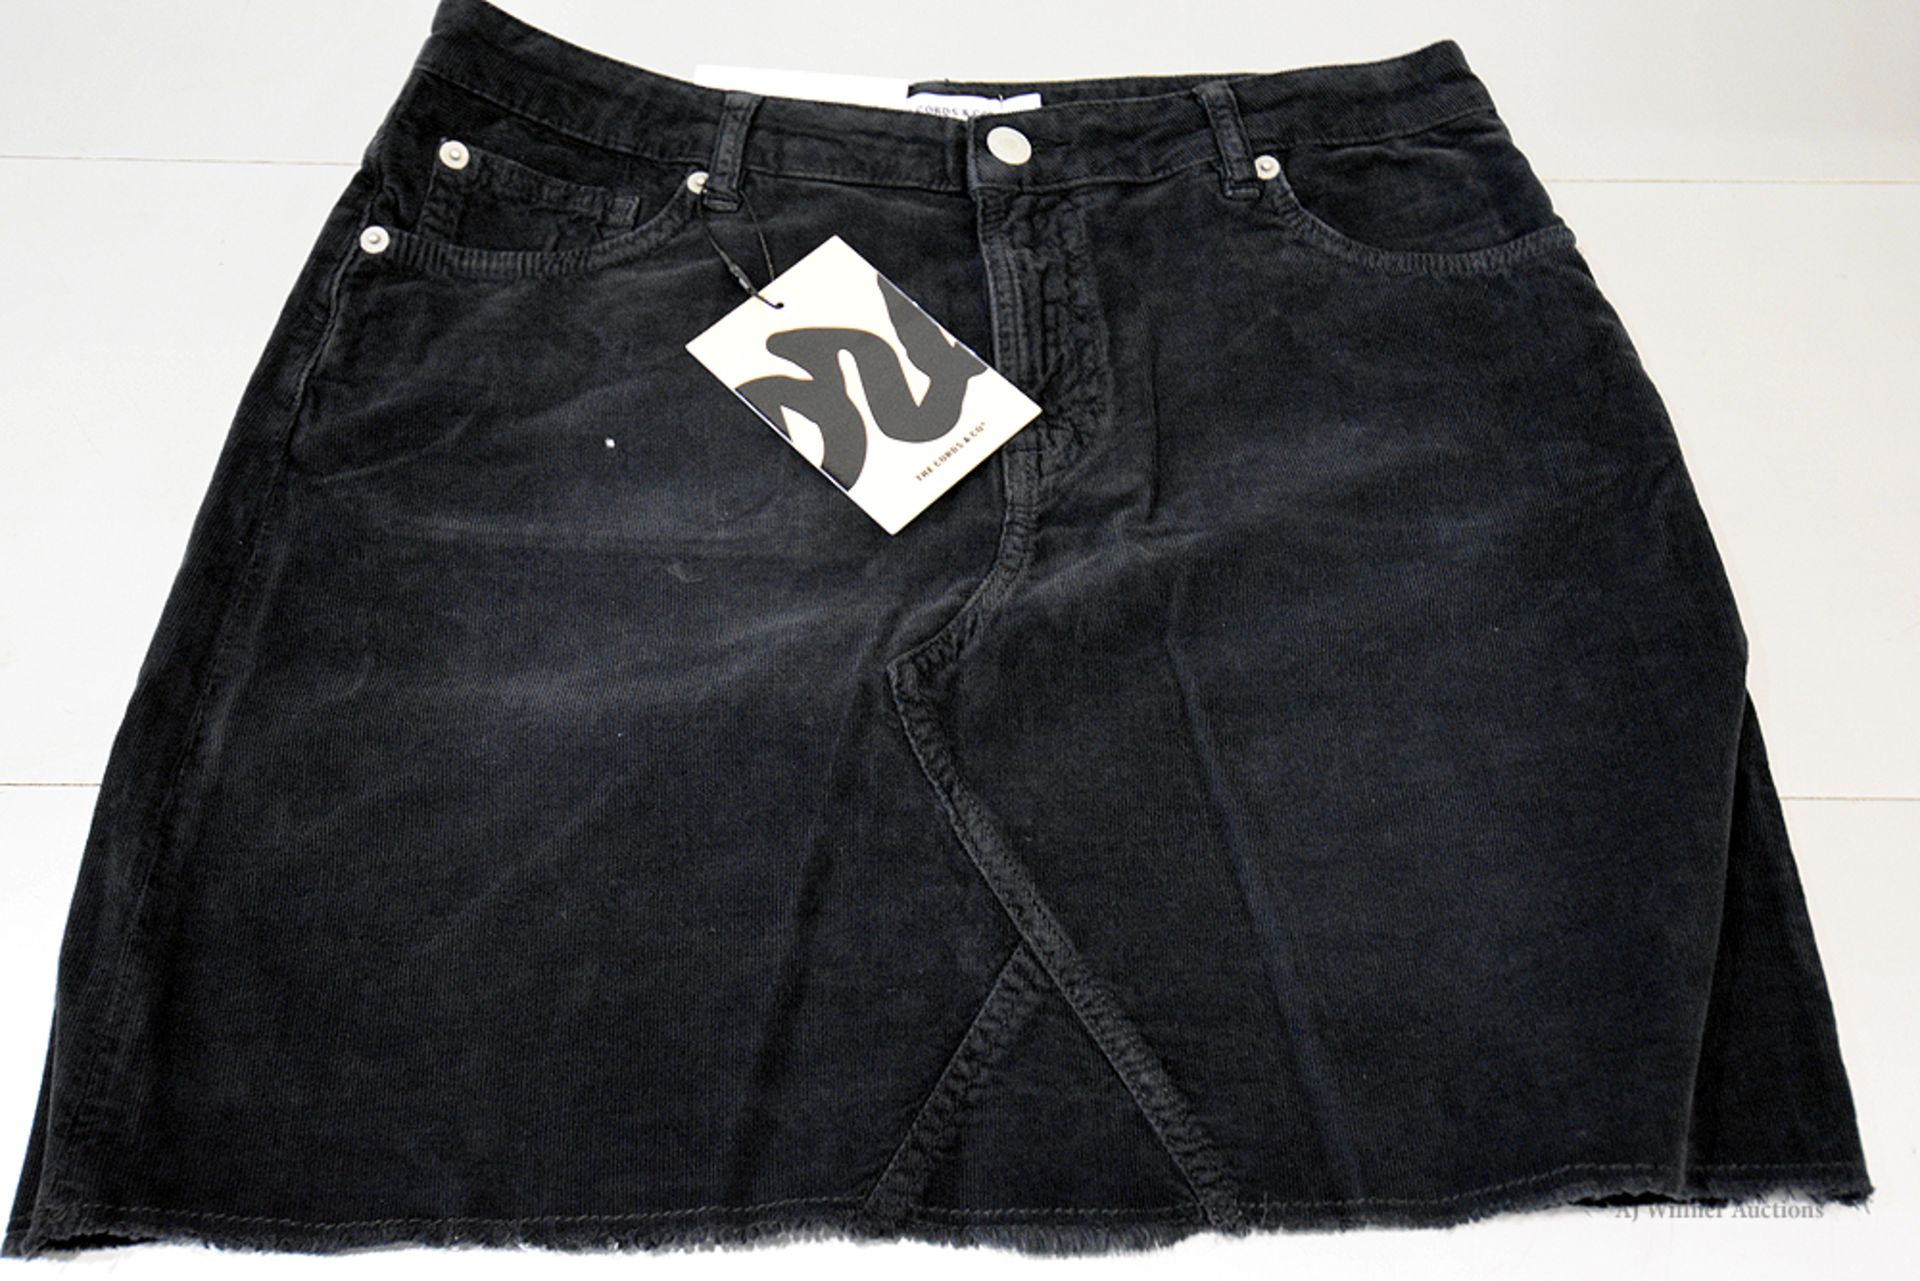 The Cords & Co. "Moa" Women's/ 5-Pocket/ Mid Waist/ A-Line Skirts MSRP $120 - Image 5 of 5